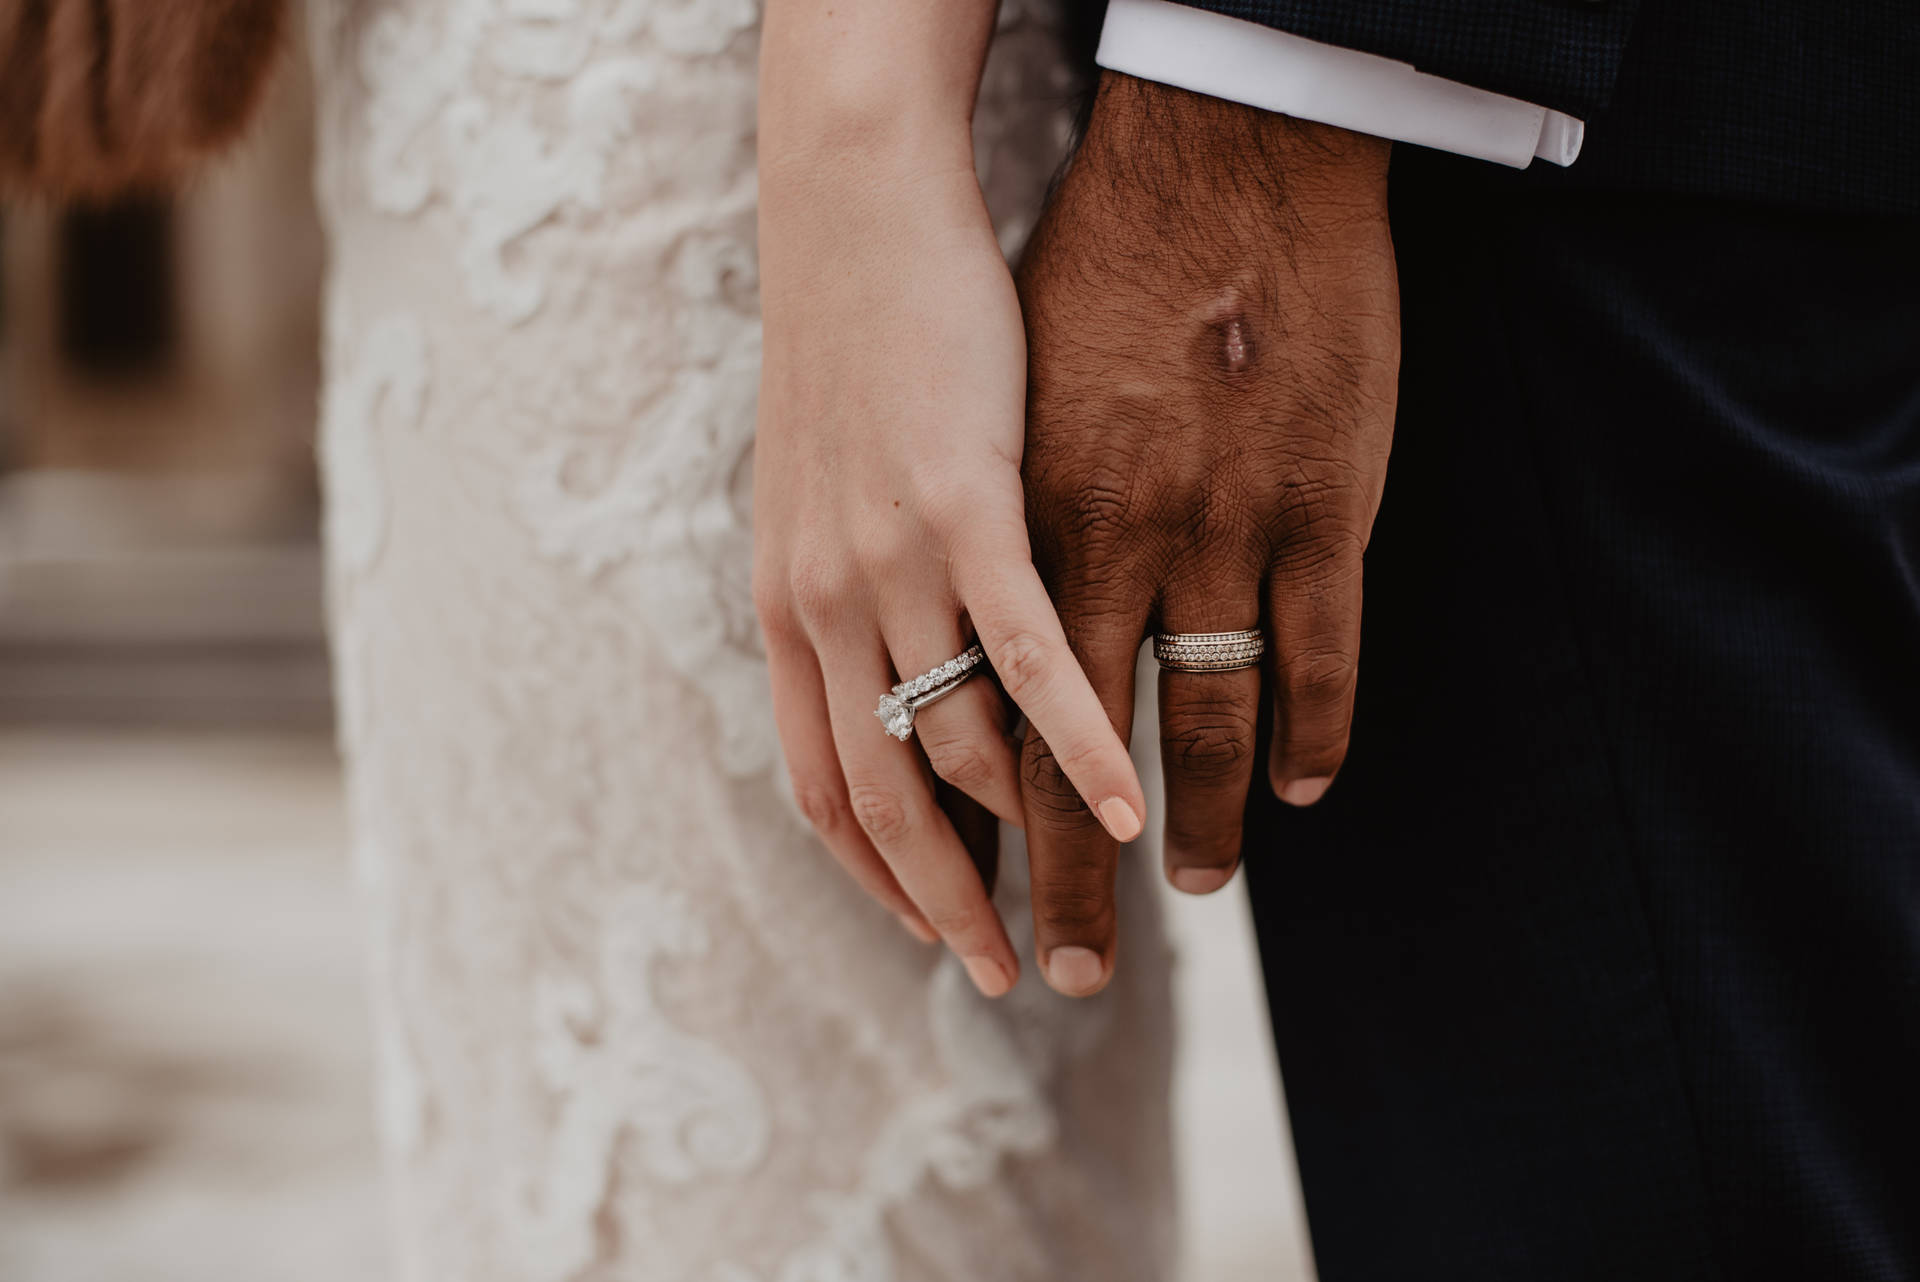 Lovers Silver-Colored Rings Wallpaper